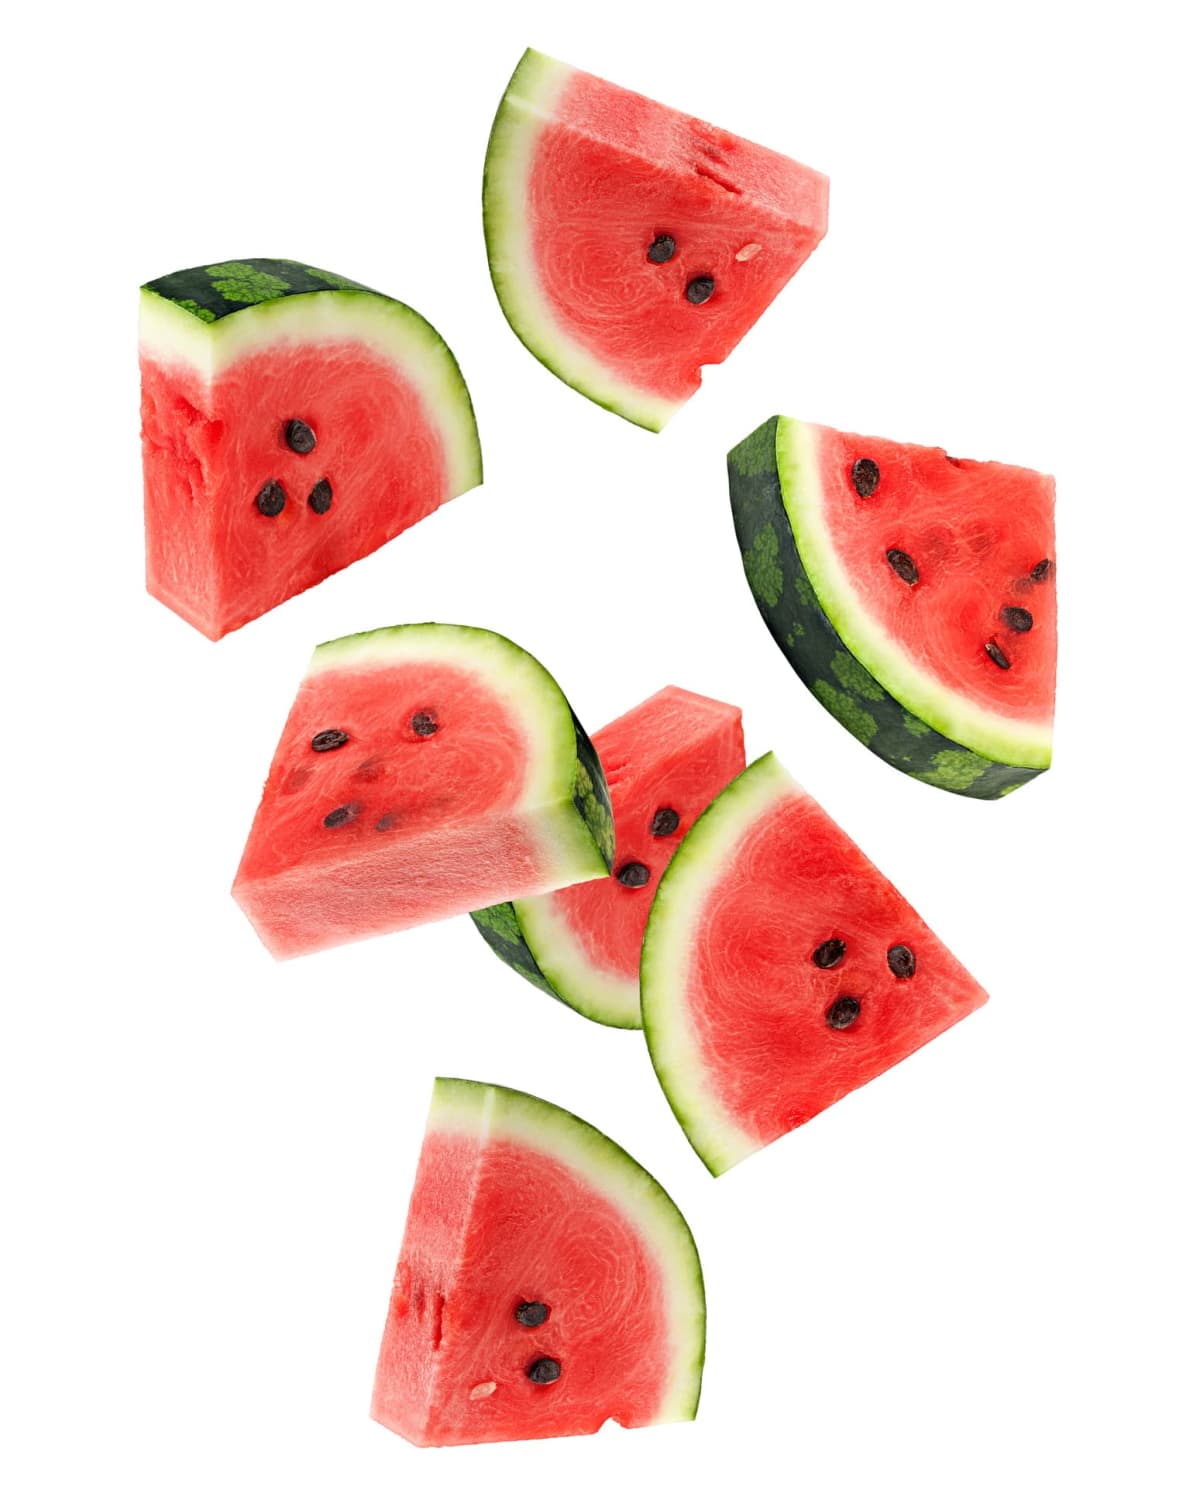 Slices of watermelon against a white background